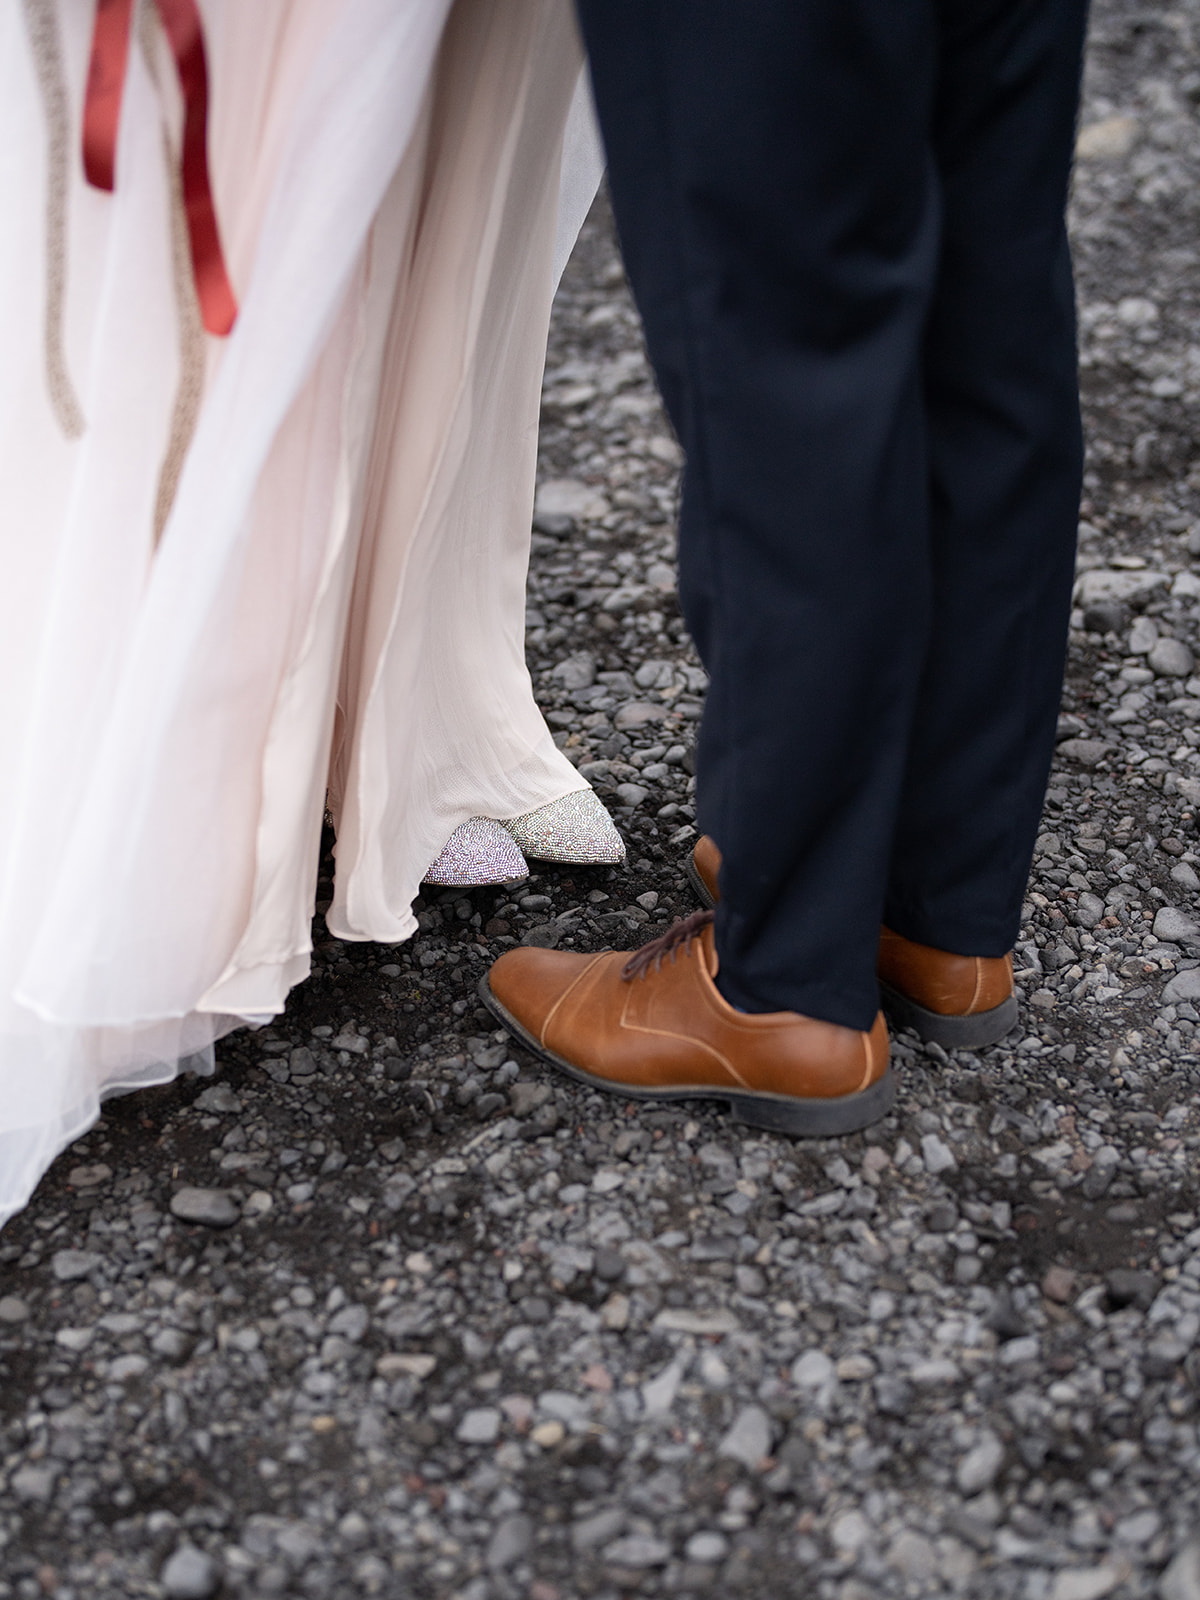 Bride and groom eloping in Iceland at skogafoss waterfall